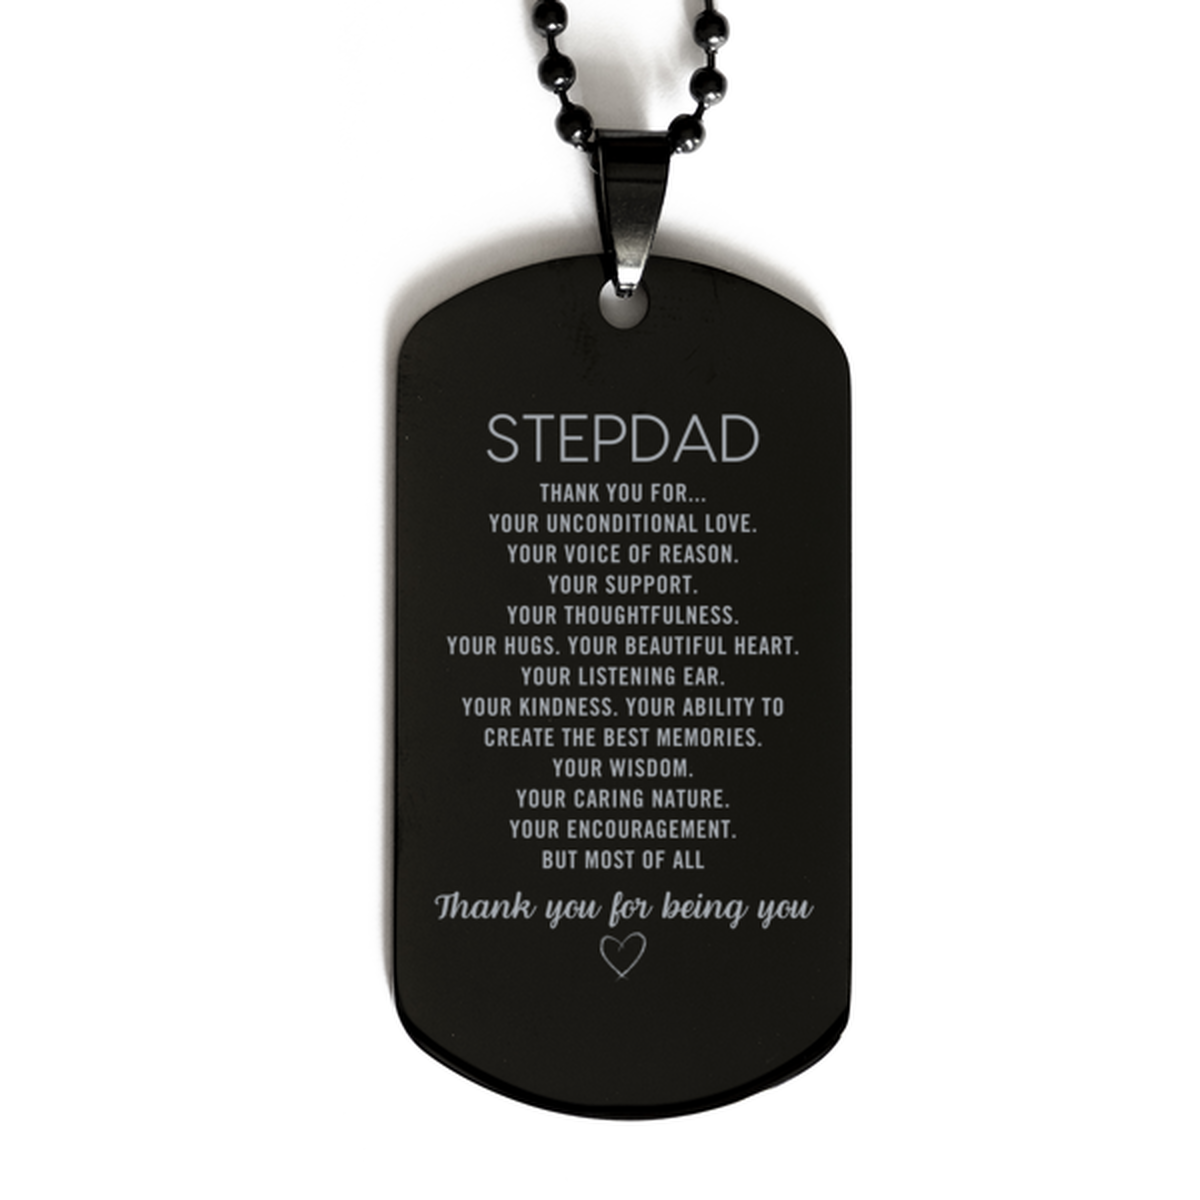 Stepdad Black Dog Tag Custom, Engraved Gifts For Stepdad Christmas Graduation Birthday Gifts for Men Women Stepdad Thank you for Your unconditional love